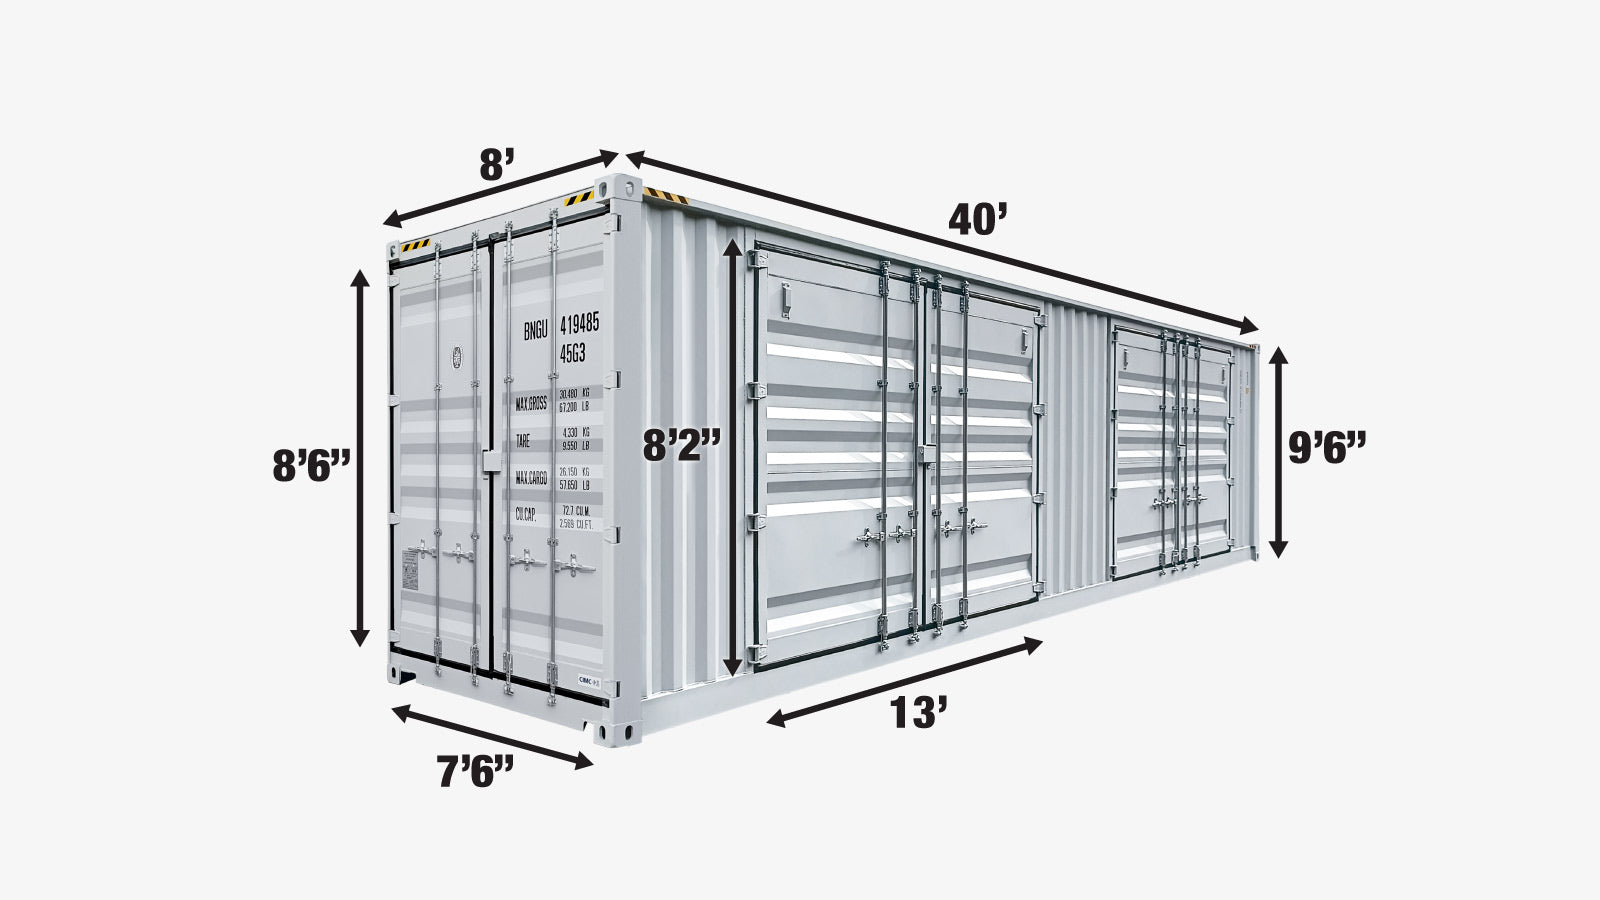 TMG Industrial 40' High Cube Shipping Container w/2 Side Open Doors , One Way Use, Security Lock Boxes, Ocean Sea Can Standards, TMG-SC45S-specifications-image